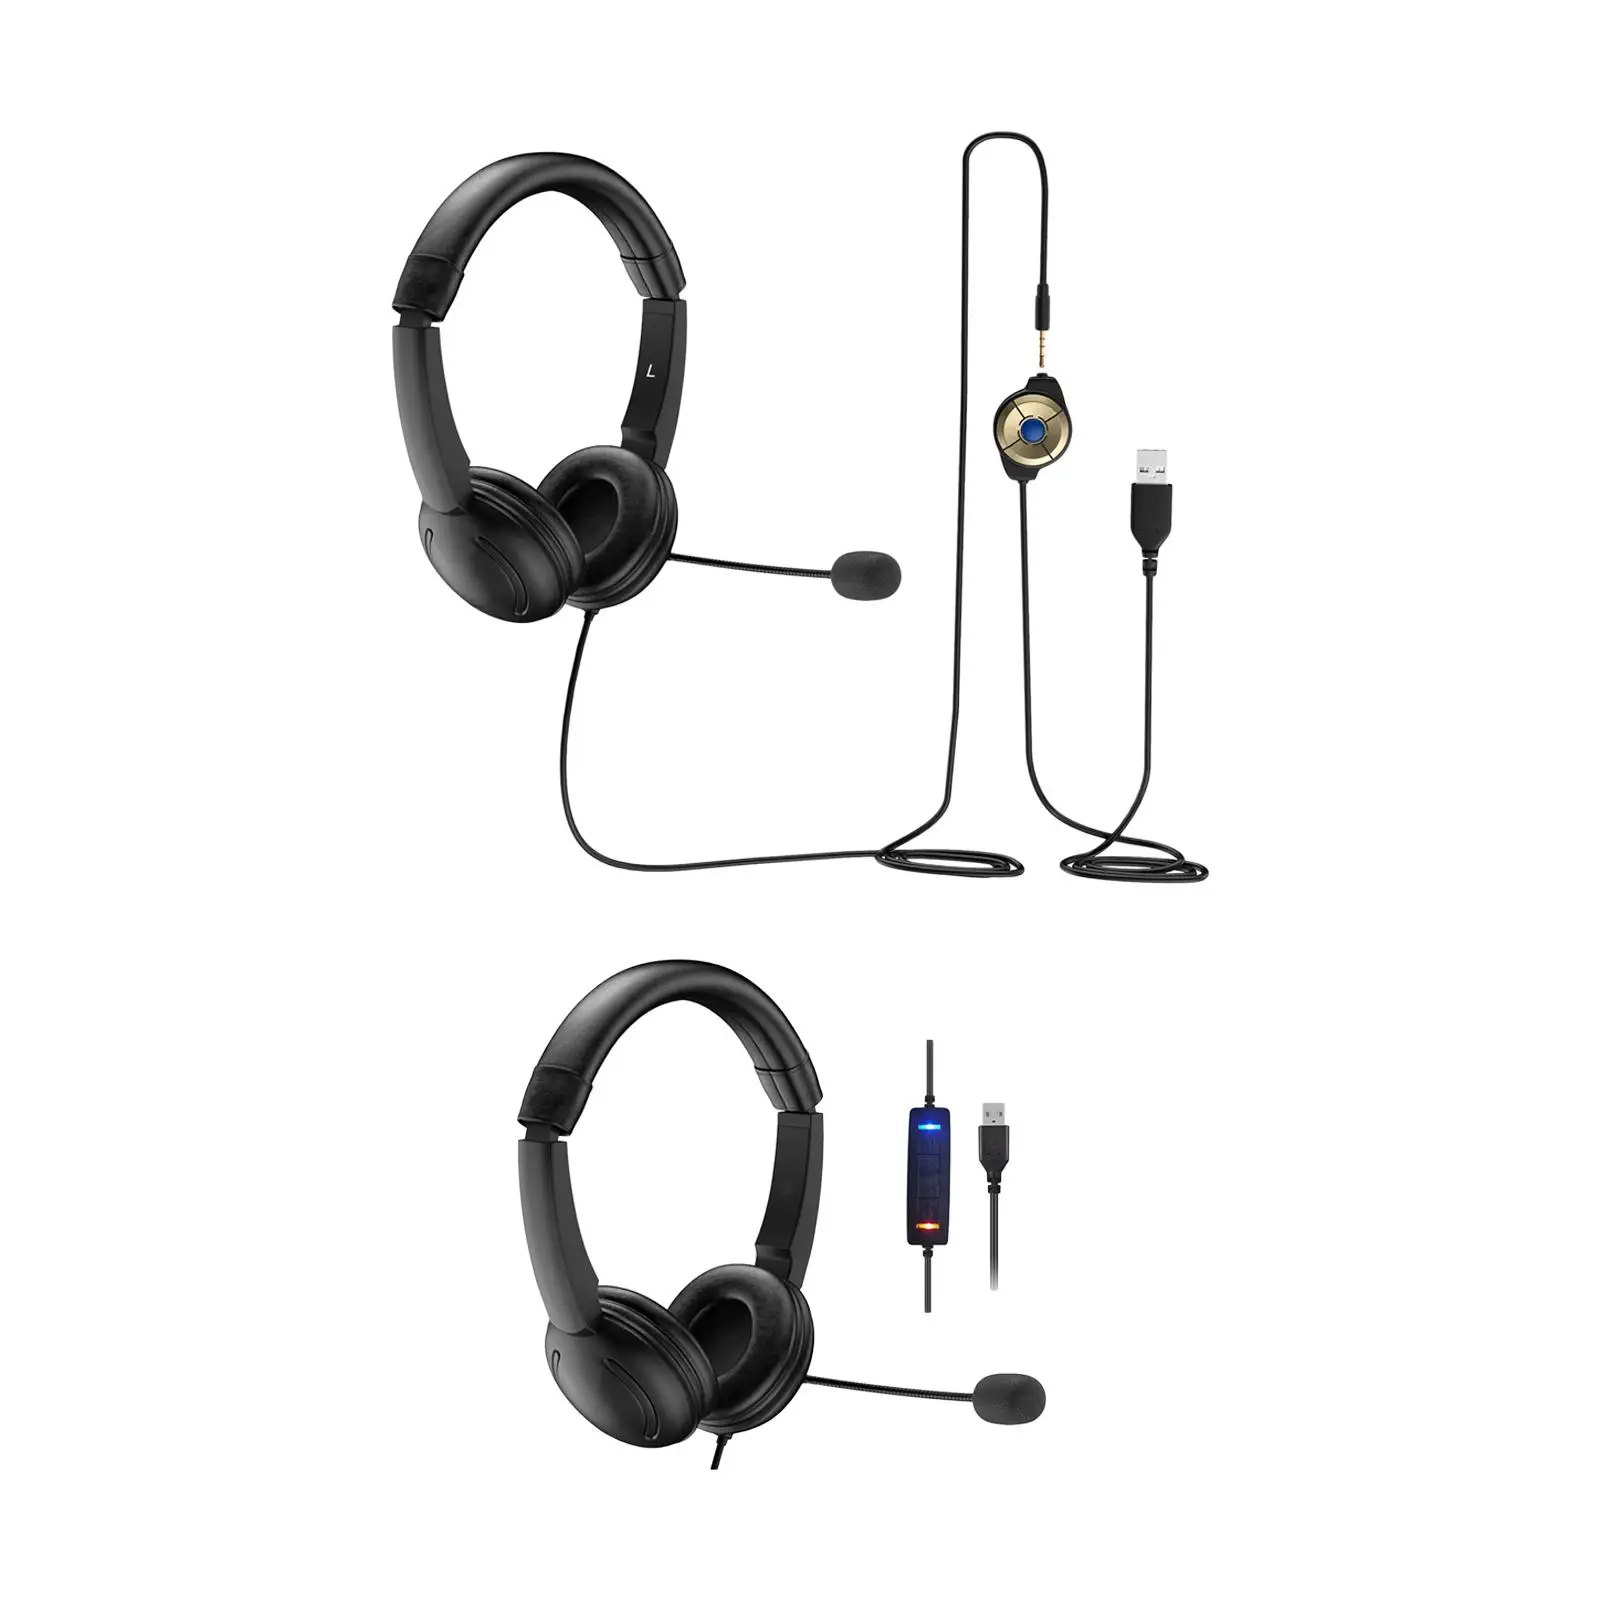 USB Wired Headset Soft Lightweight Computer Headset Computer Laptop Headphones for Laptop Video Meetings Home Office Call Center